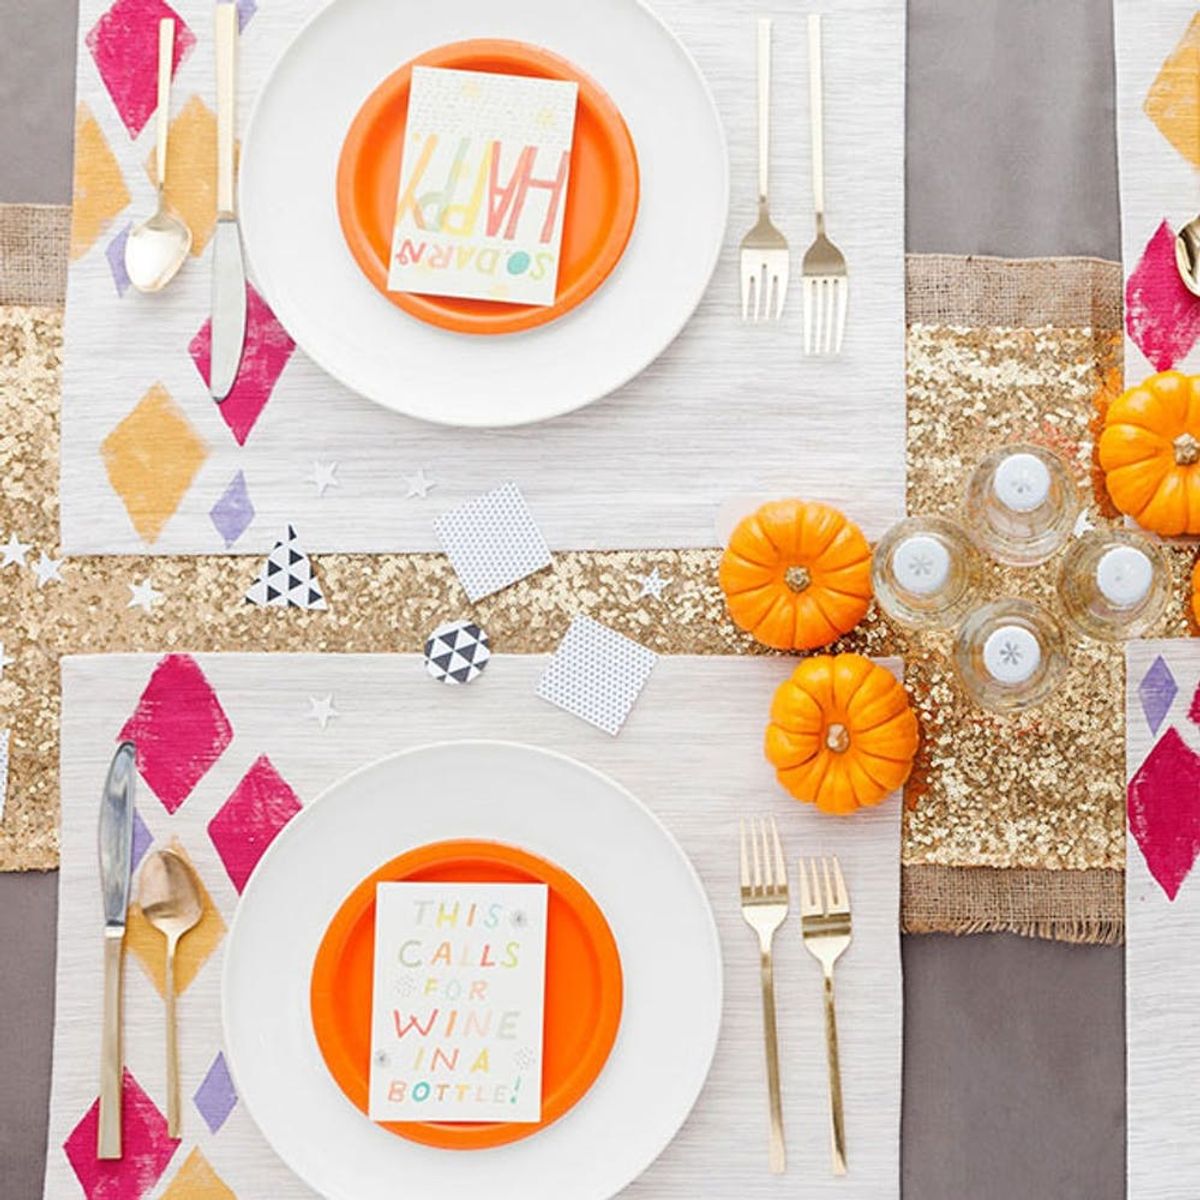 These Hand-Stamped Placemats Will Level Up Your Next Dinner Party